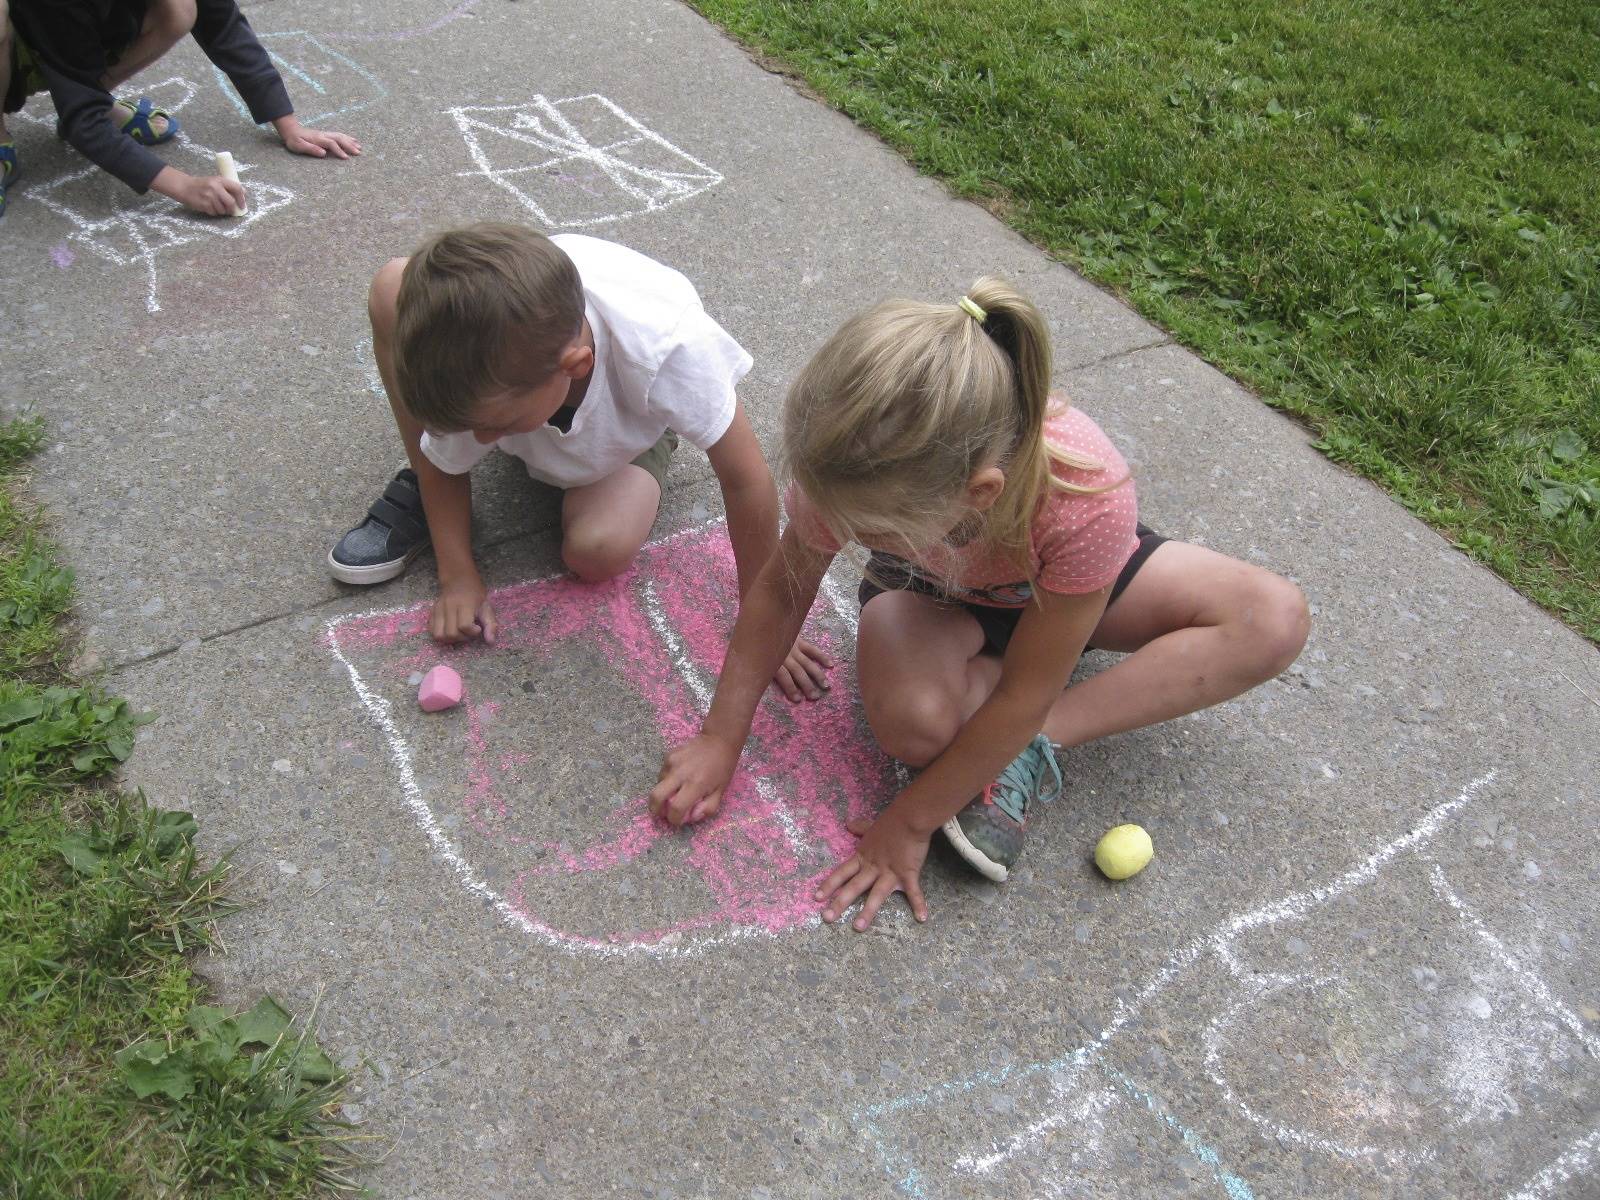 students using chalk on the sidewalk at campout.